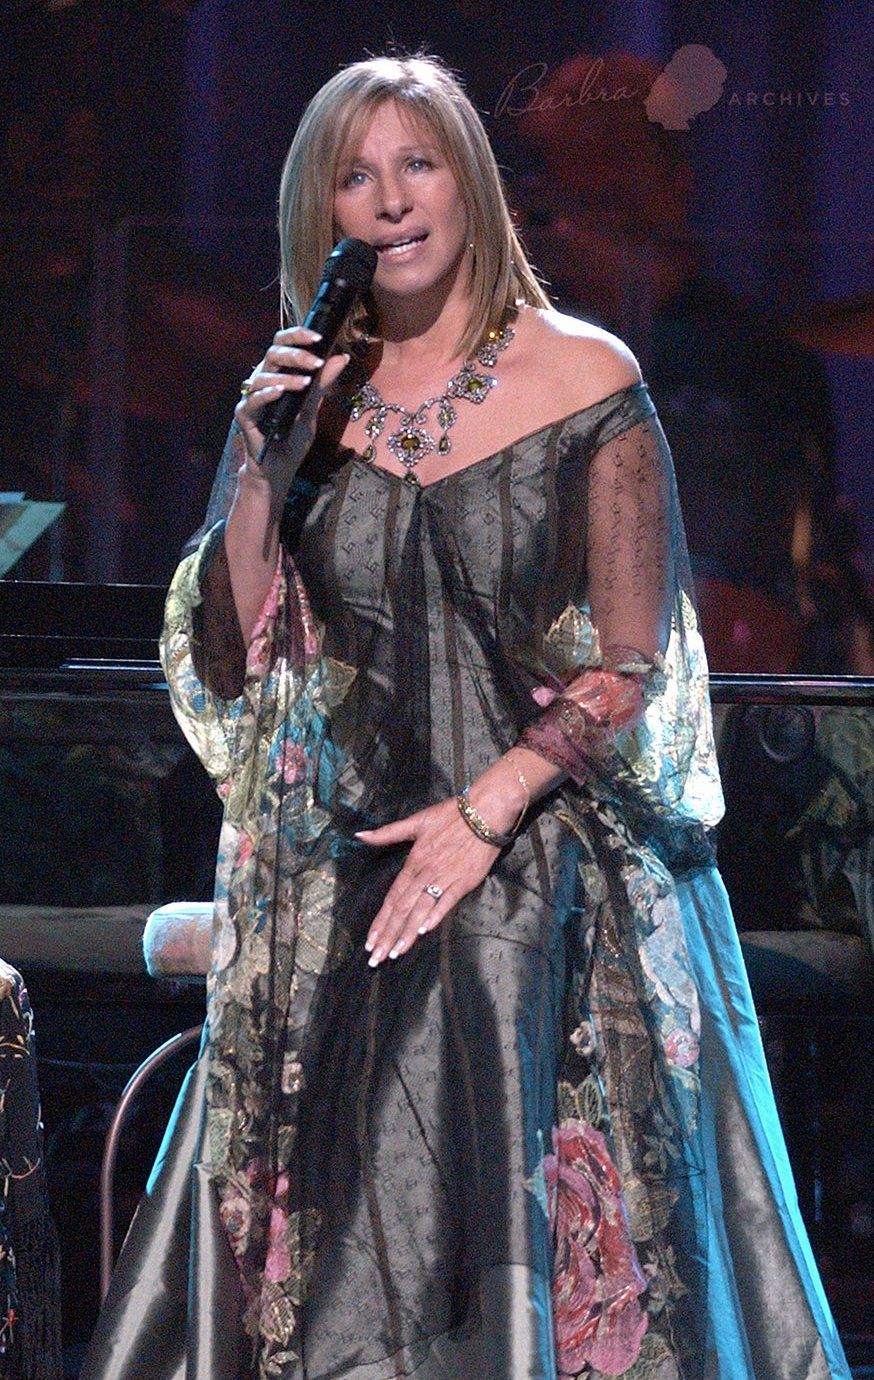 Streisand in beautiful gown singing for Democrats in 2002.